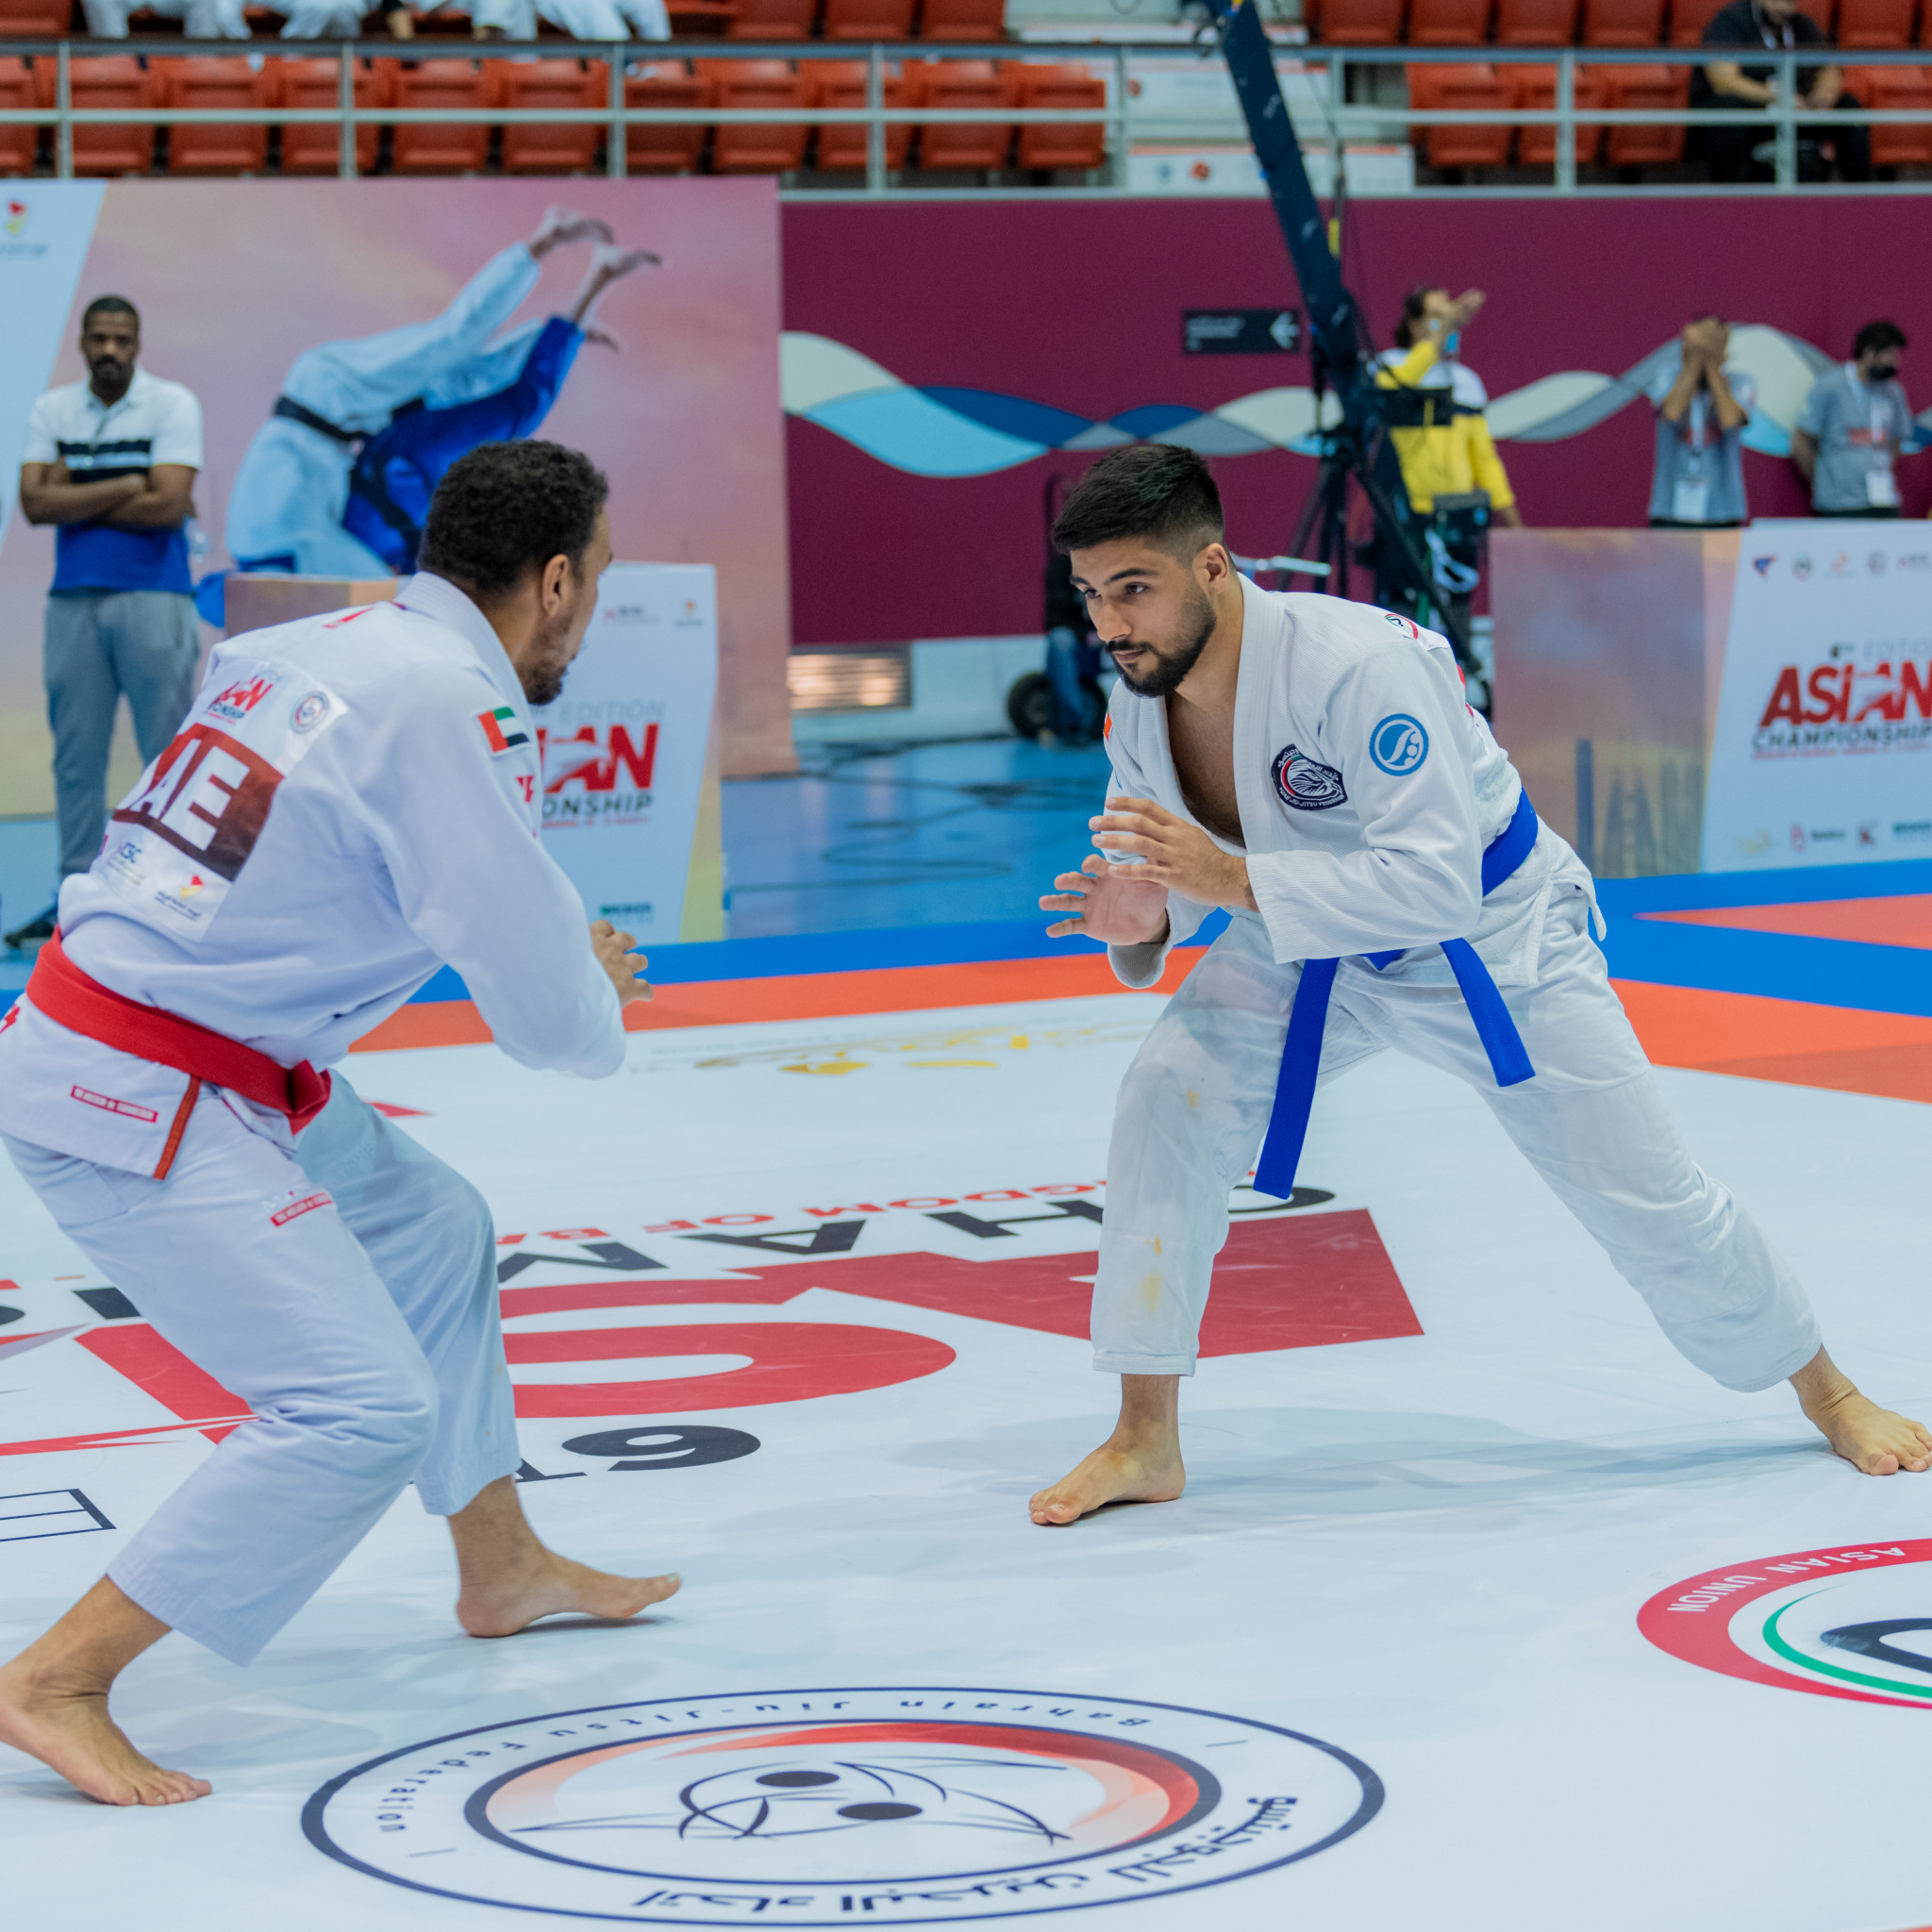 UAE lead medals table at Asian Ju-Jitsu Championships after Opening Ceremony